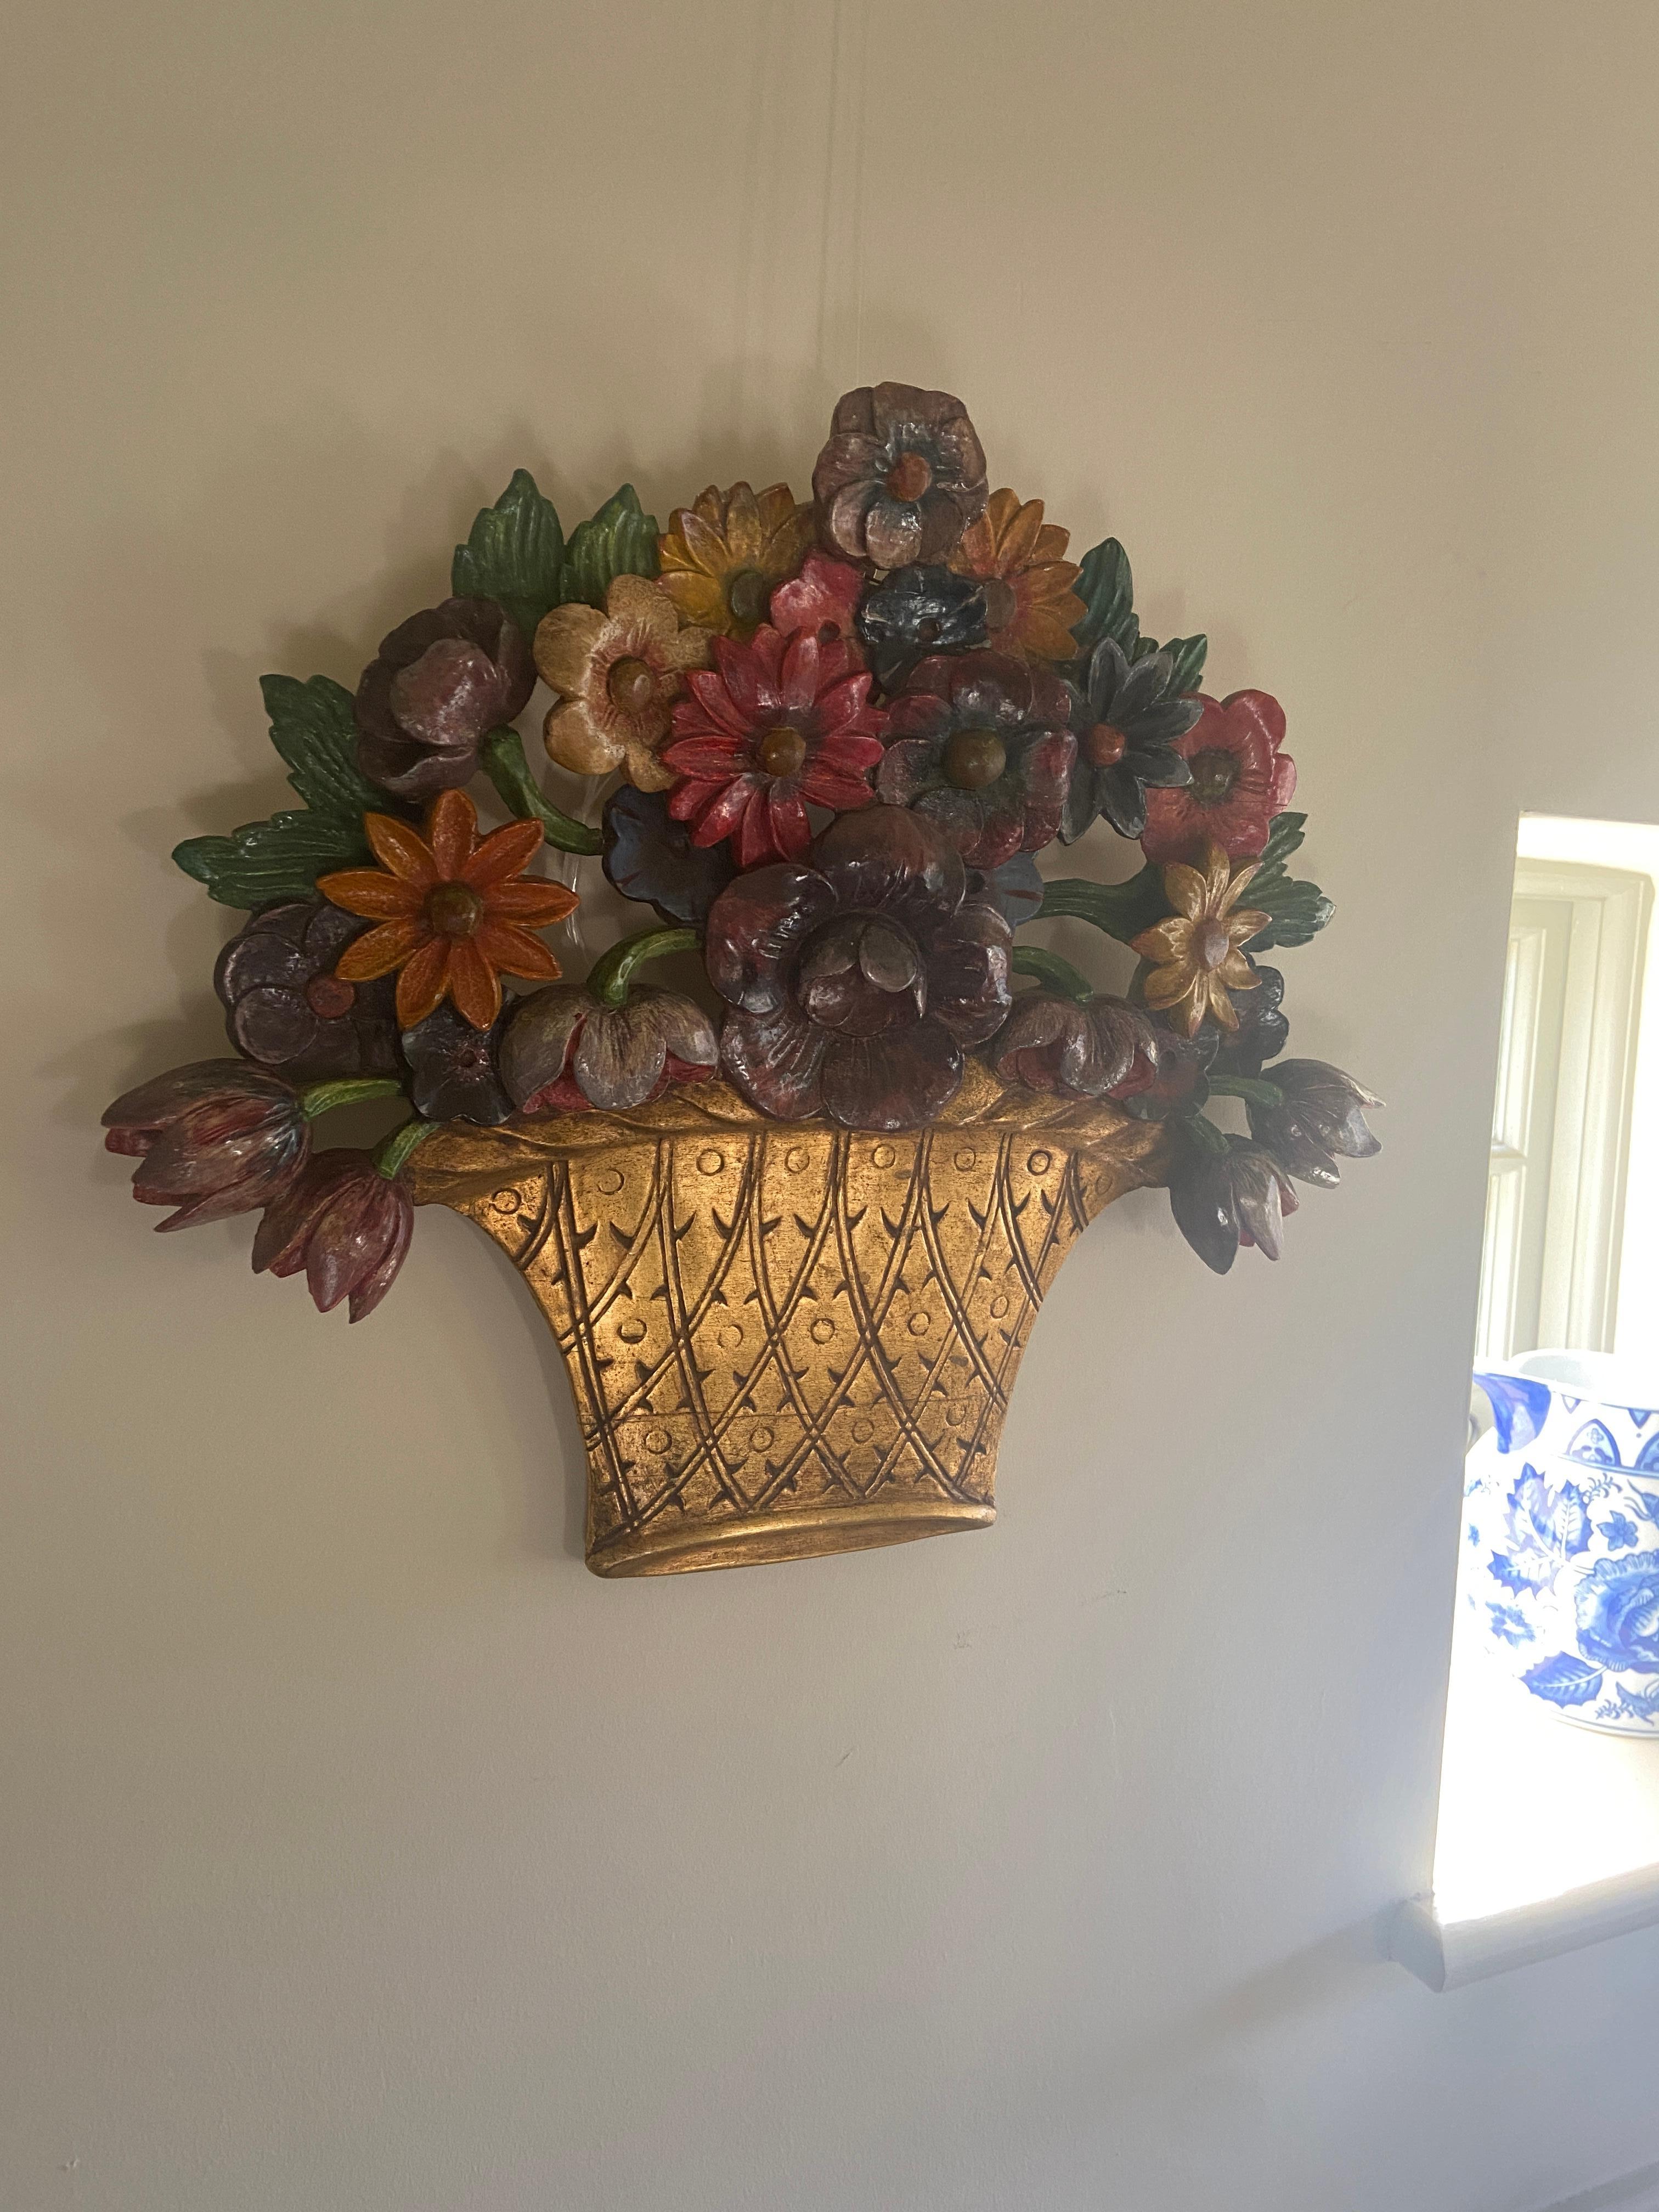 A 1930s English Art Deco floral basket  carved wood polychrome decorated wall hanging or appliqué.

This  very decorative hand carved wall hanging is fashioned as a gilded basket overflowing with with various coloured flowers and foliage. This works